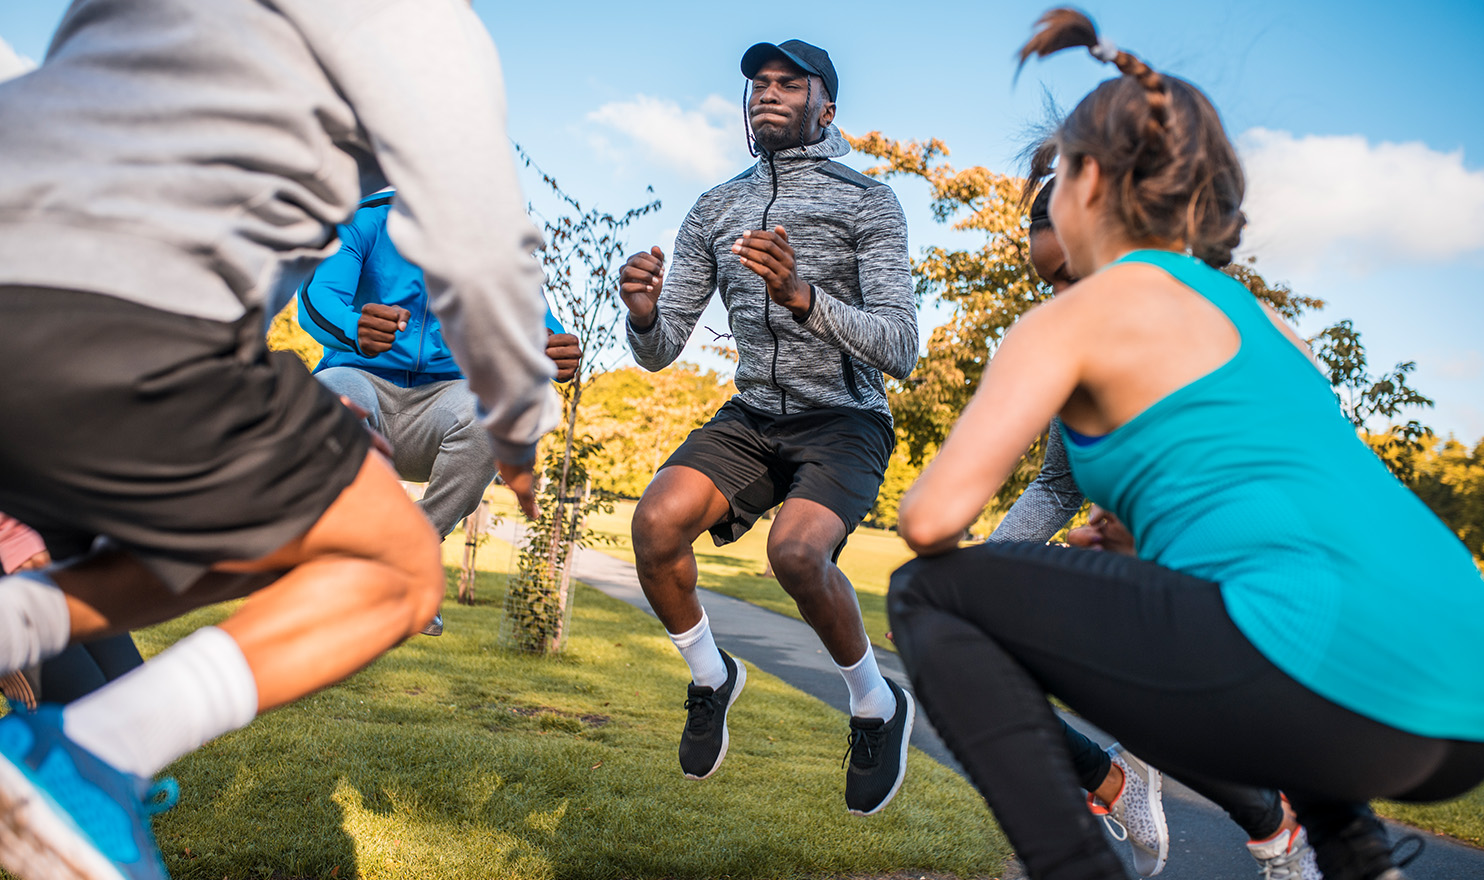 A personal trainer and his clients are all mid-jump as they perform HIIT exercises together outside.